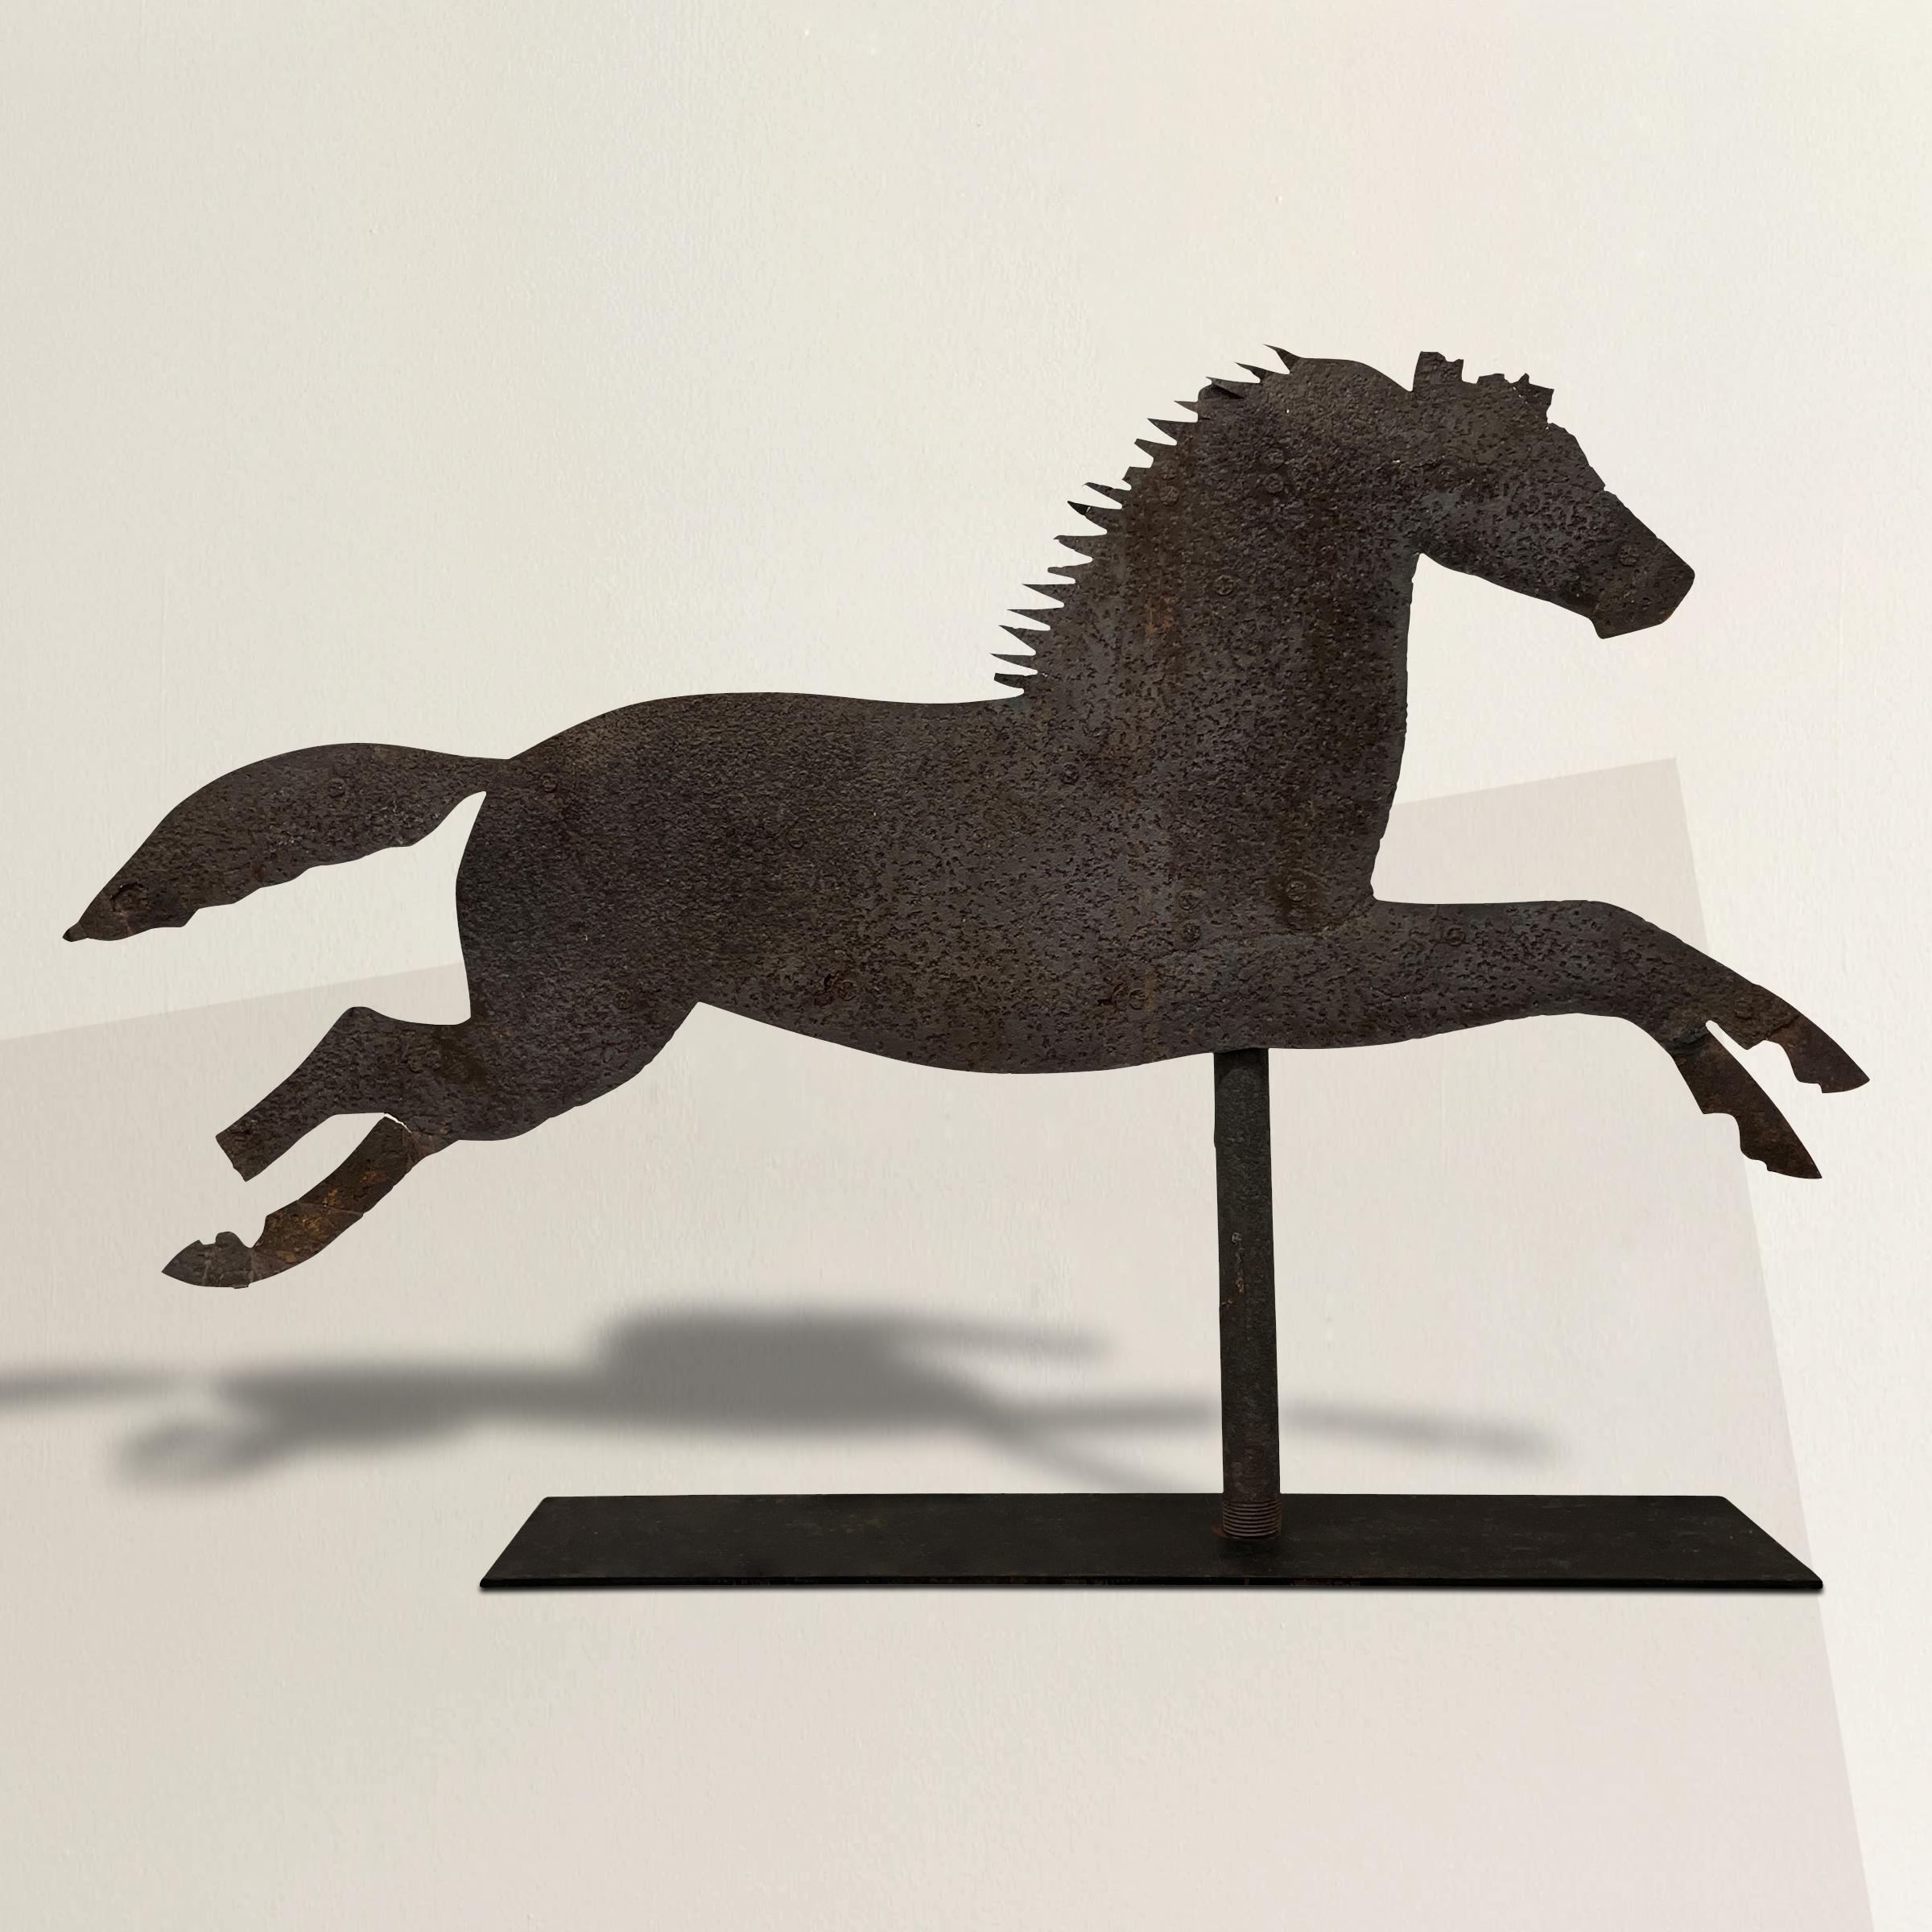 A rather large late 19th/early 20th century American Folk Art cut steel weathervane with a leaping horse silhouette mounted on a steel pipe, and a custom steel mount.